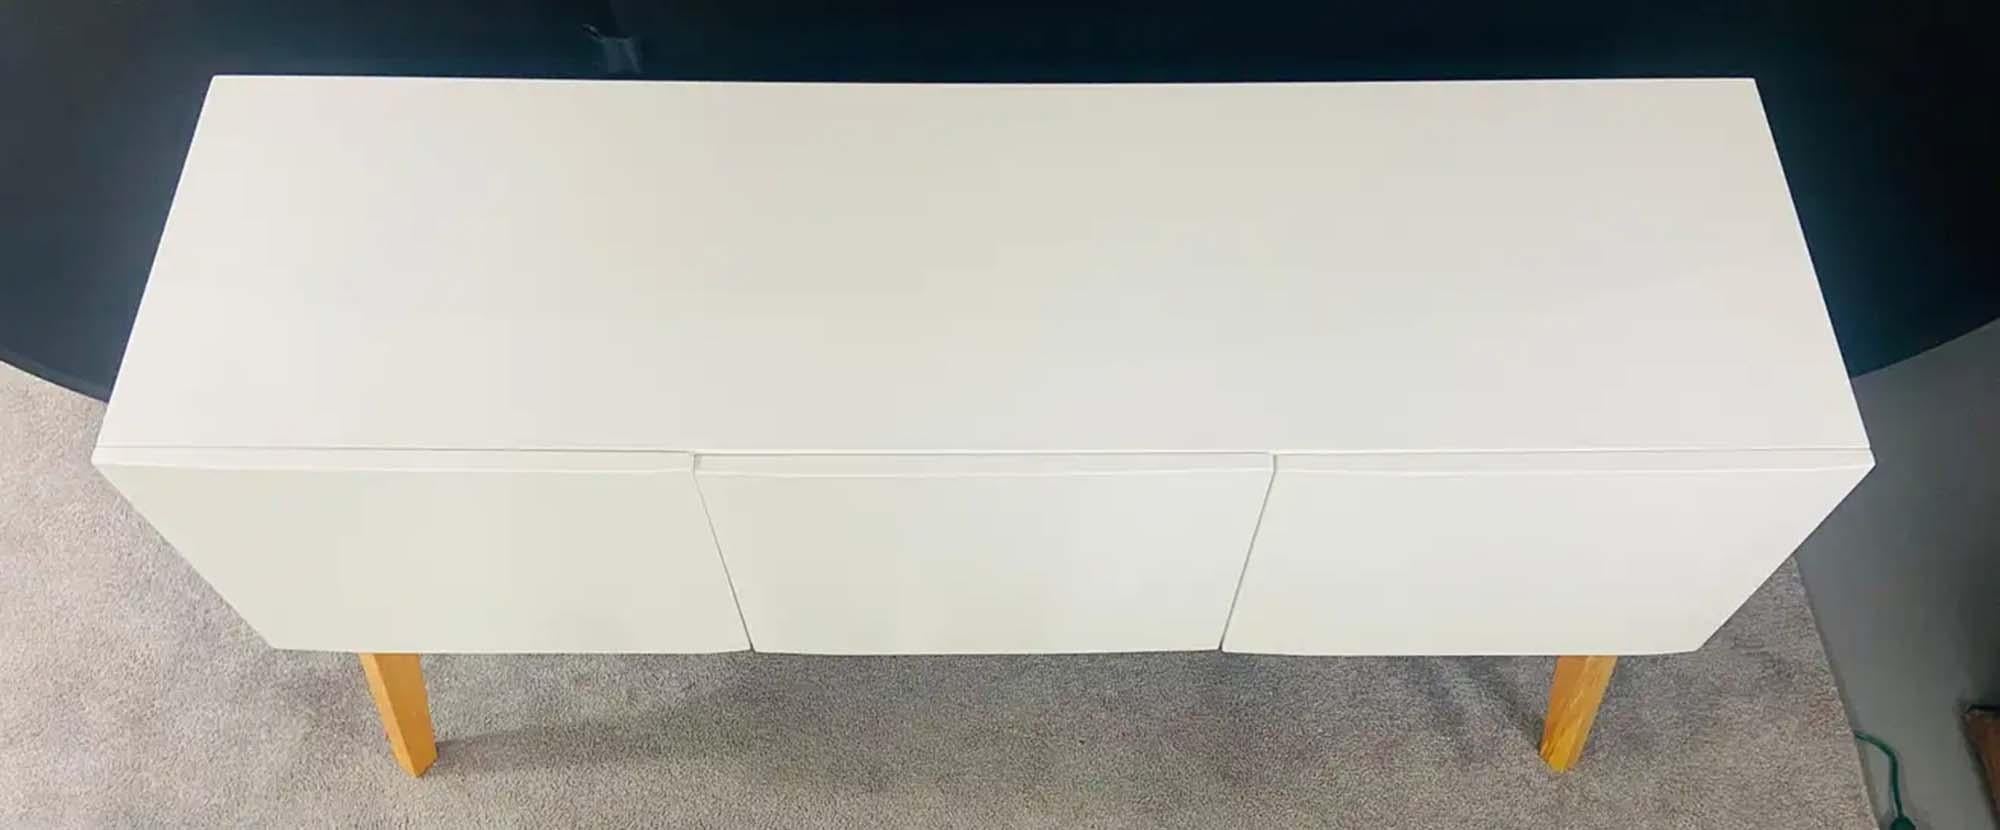 Contemporary Mid-Century Modern Style White Lacquered Sideboard, Credenza or Cabinet